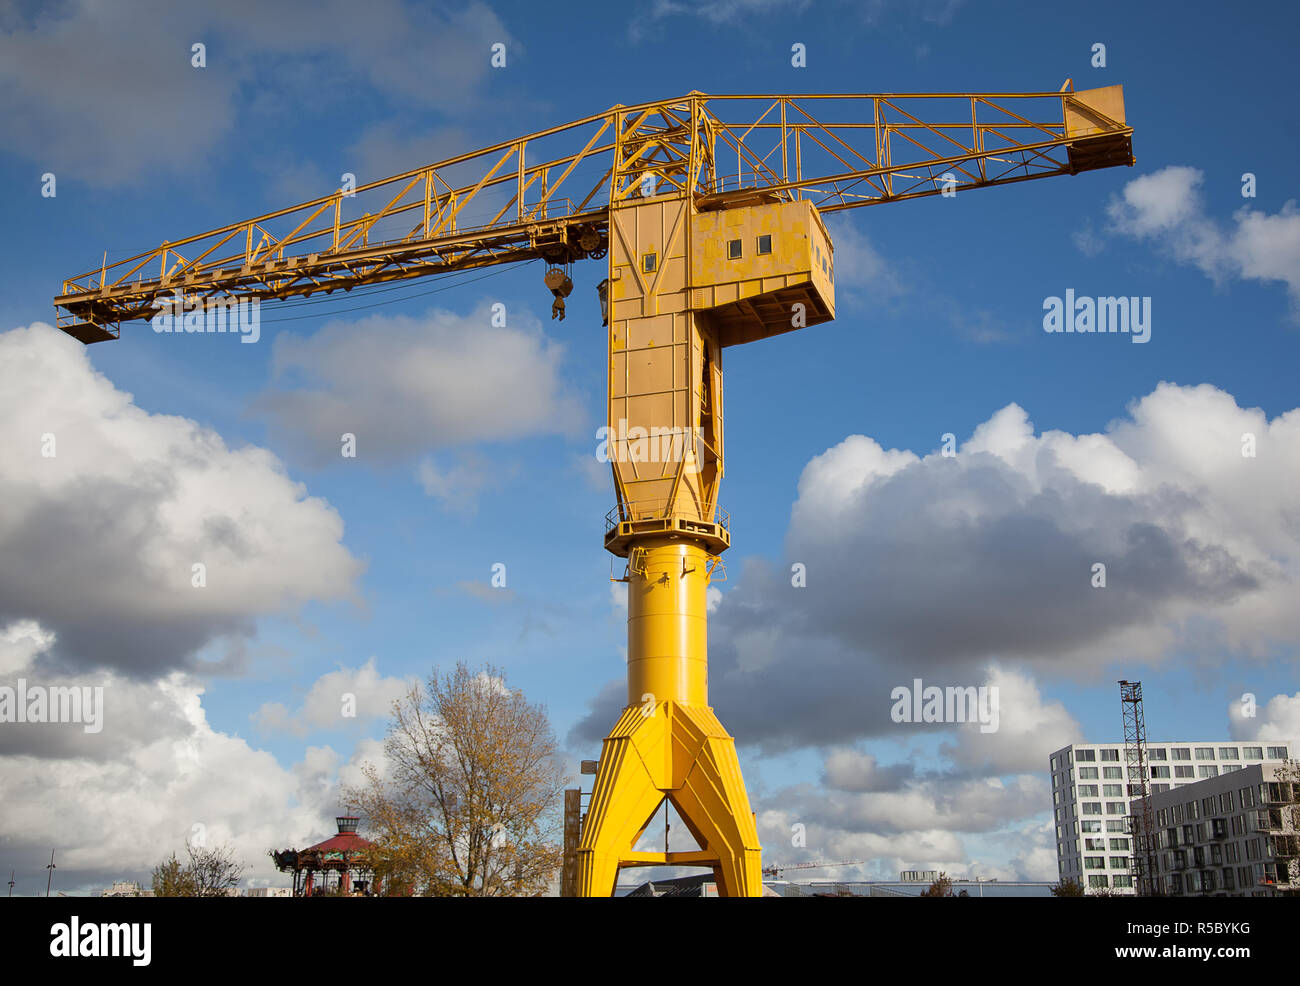 The yellow crane titan in Nantes, France green line tourist attraction in a sunny day whit clear sky and clouds Stock Photo